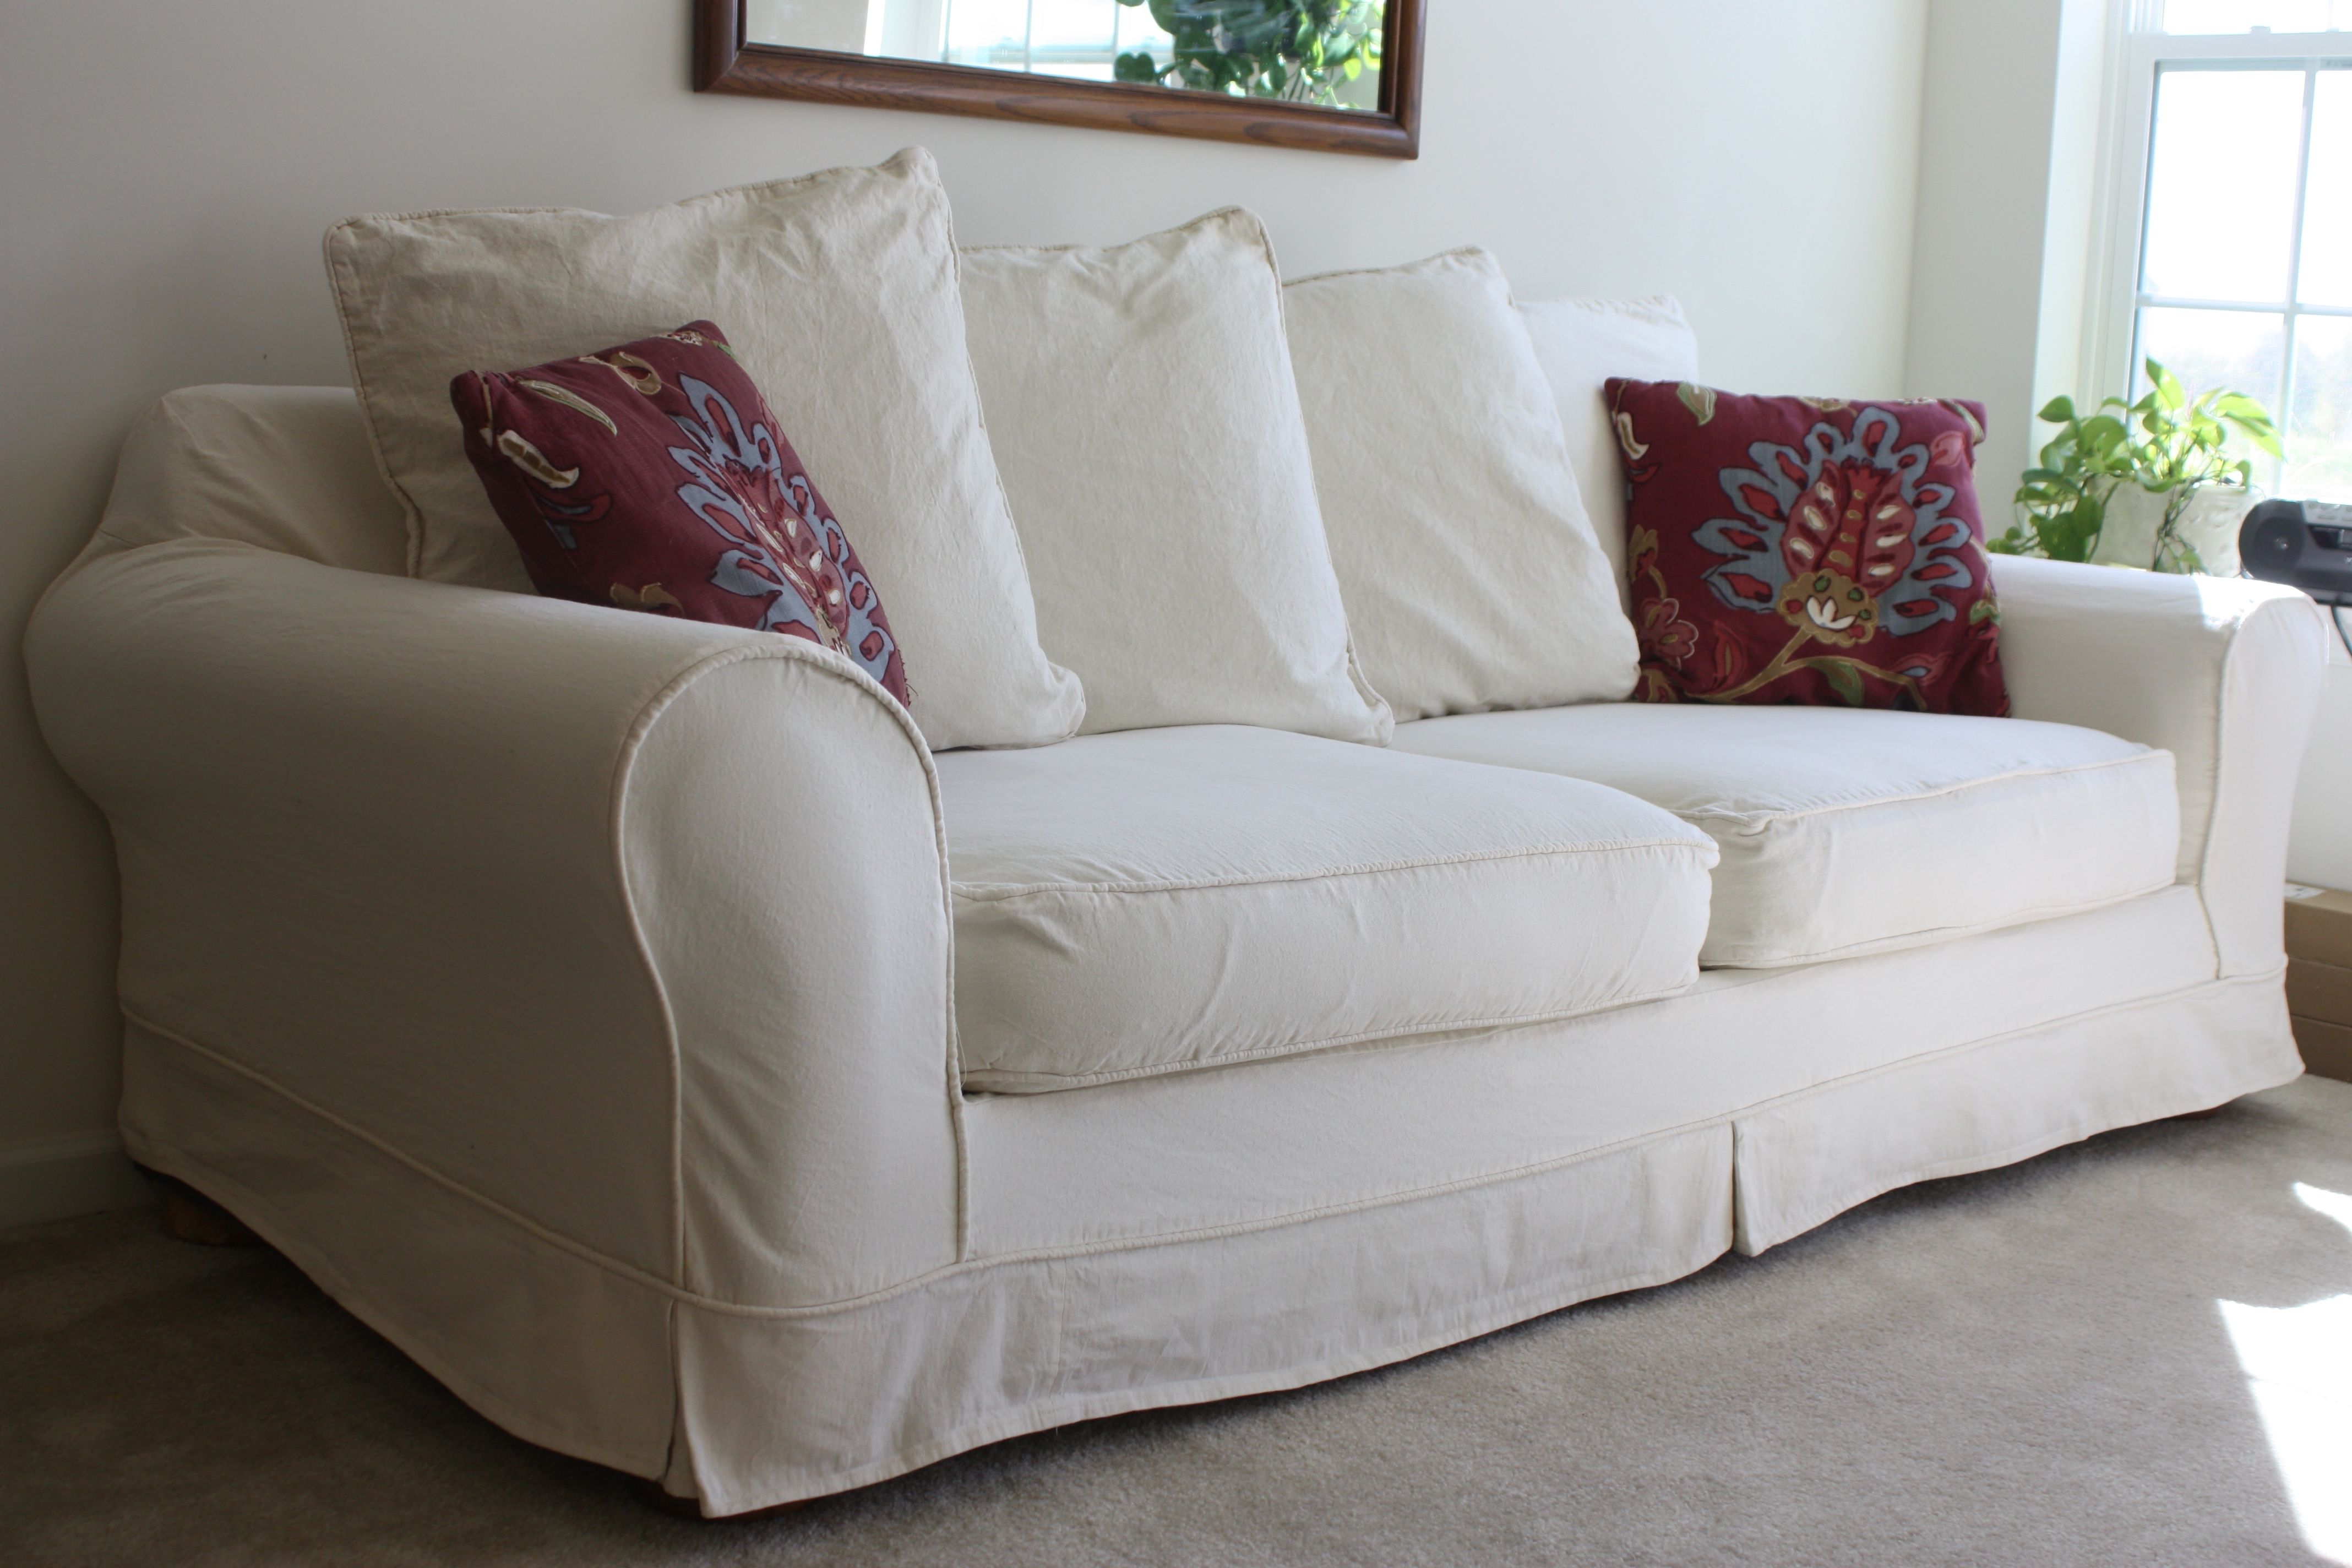 Best And Newest Slipcovers For Sofas Be Equipped Couch Protector Cover Be Equipped Intended For Slipcovers Sofas (View 1 of 20)